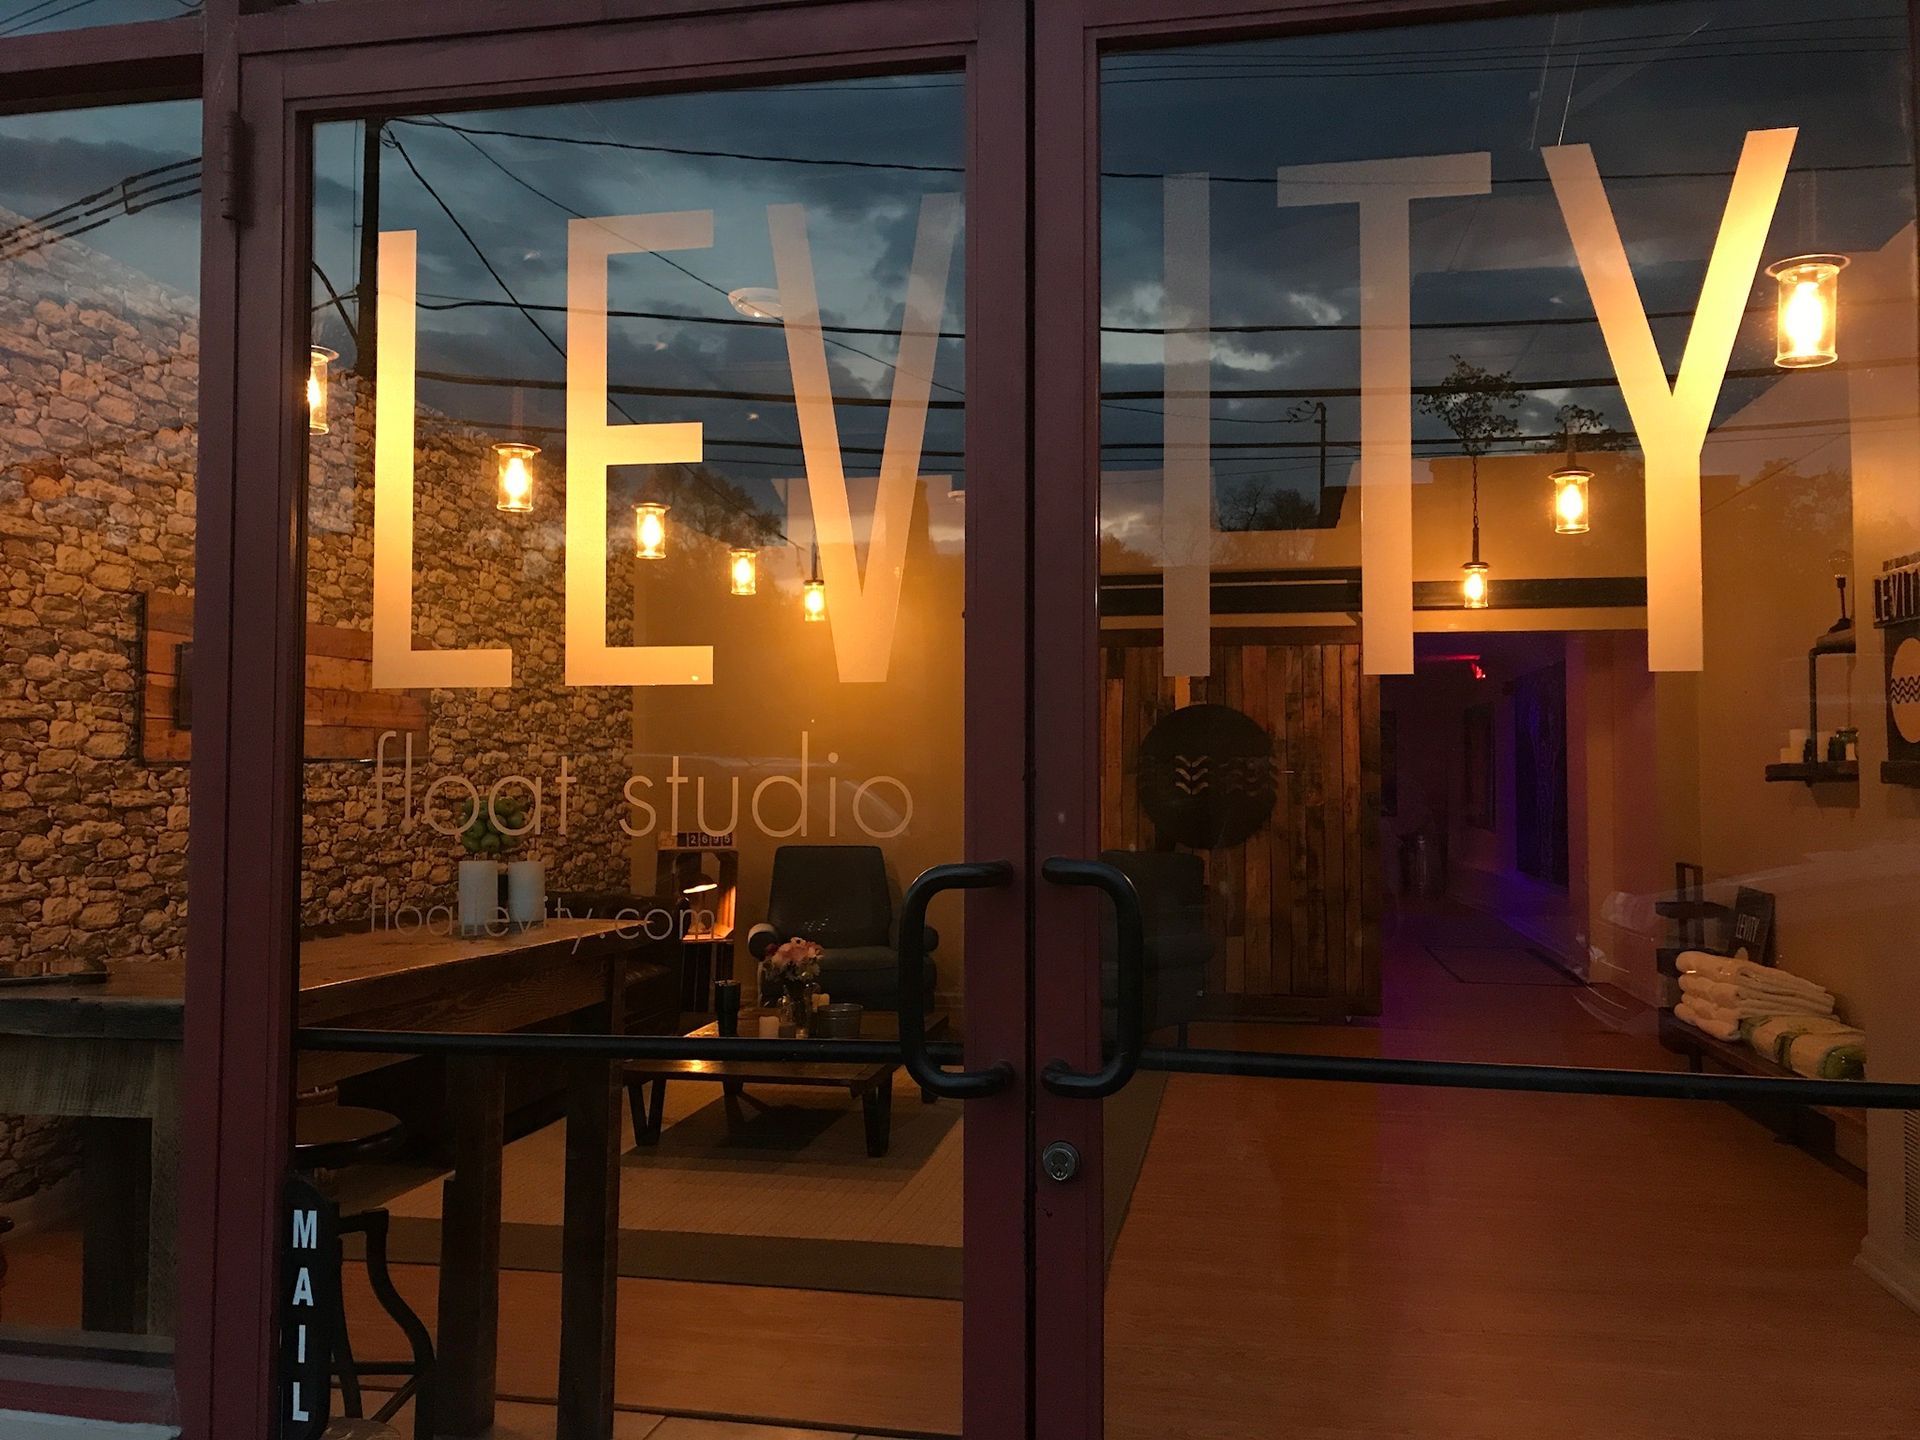 The word levity is on the glass door of a building